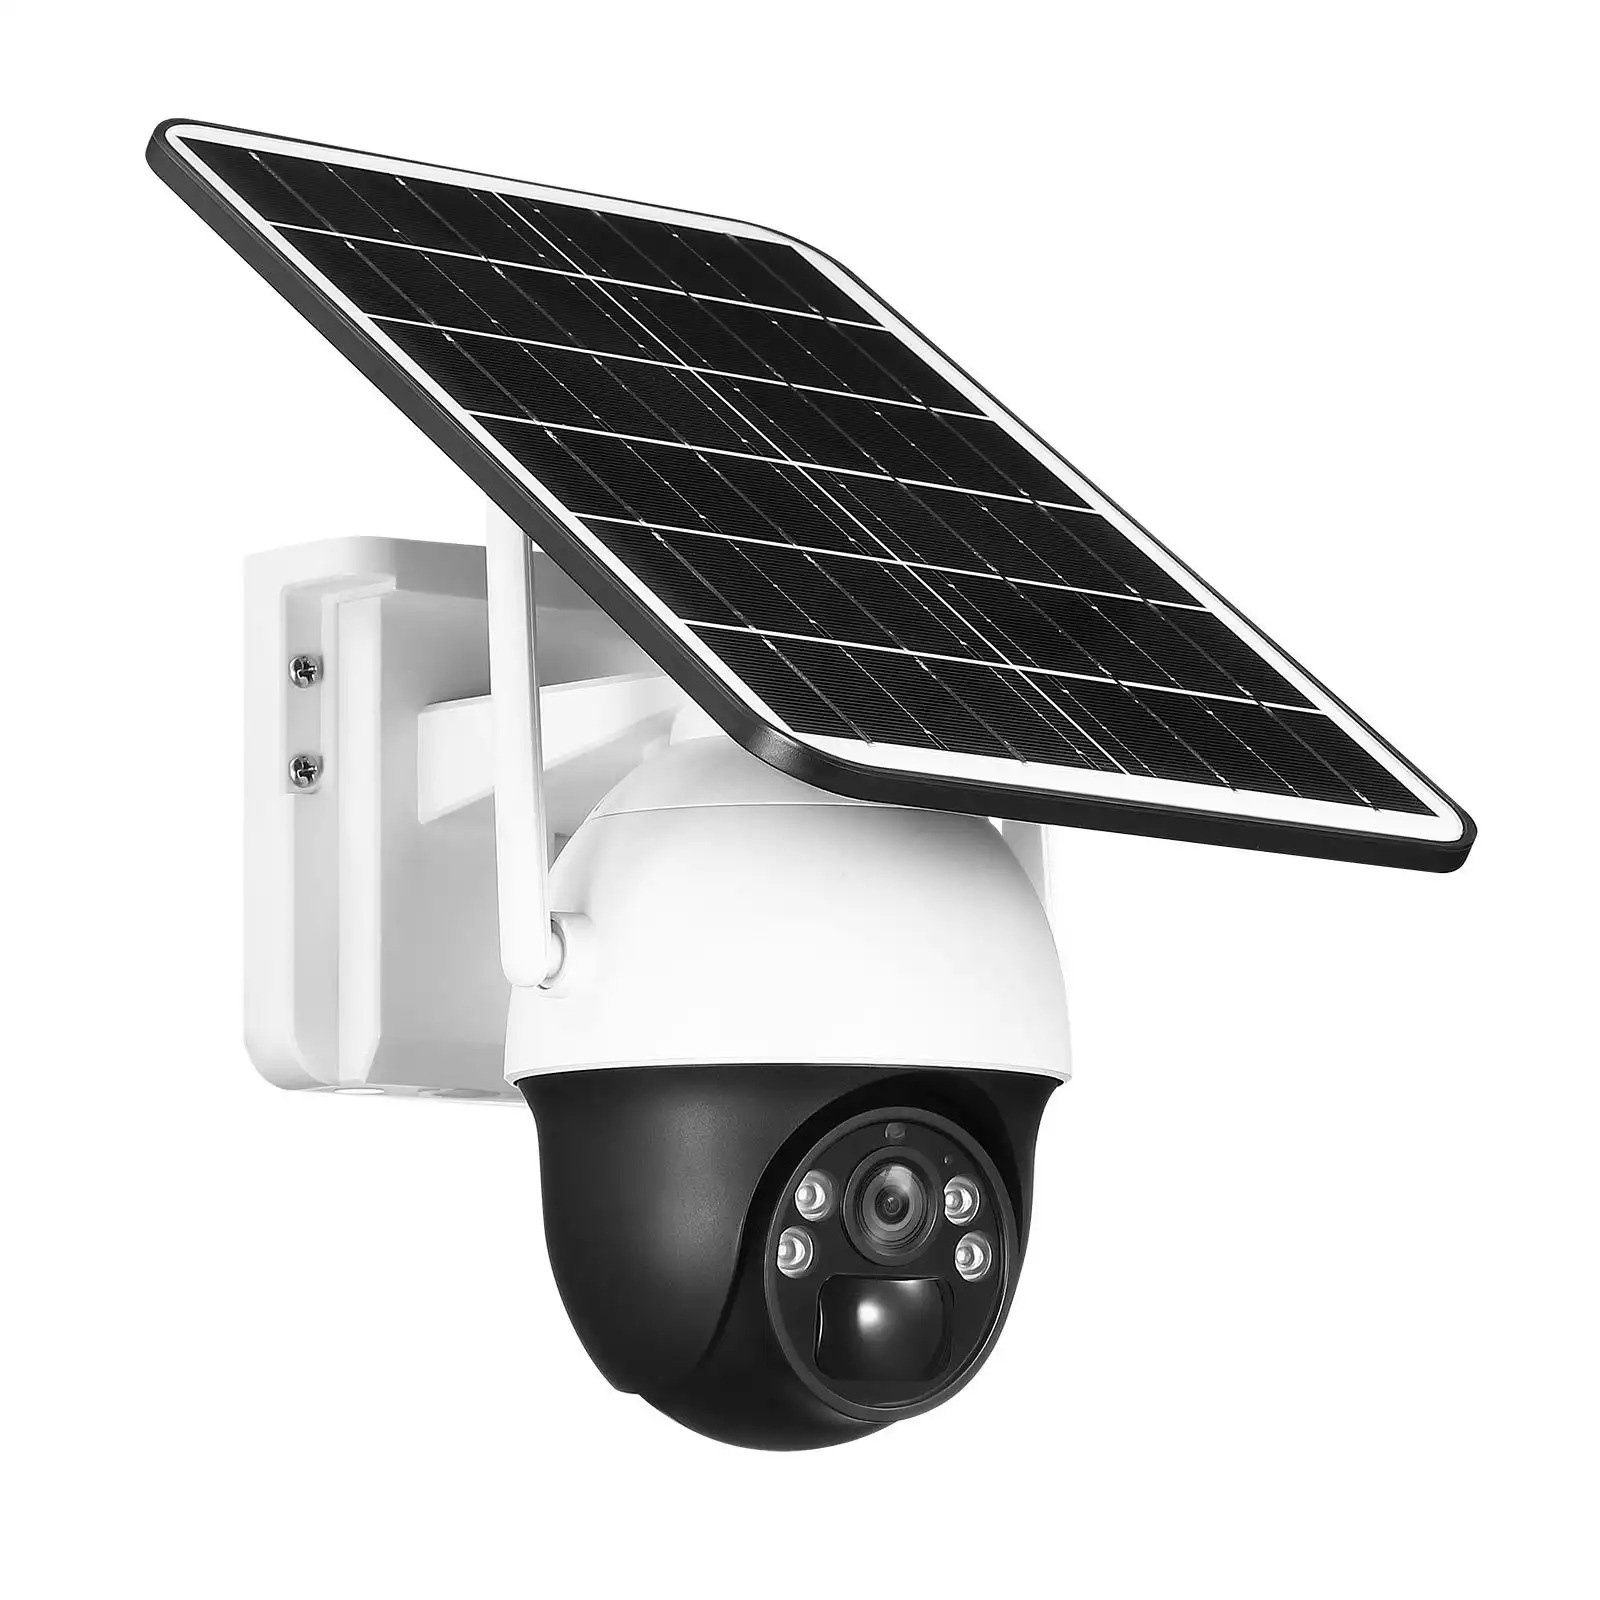 Ausway 4G Solar Security Camera Wireless Outdoor CCTV Home Surveillance System with Battery Remote Control